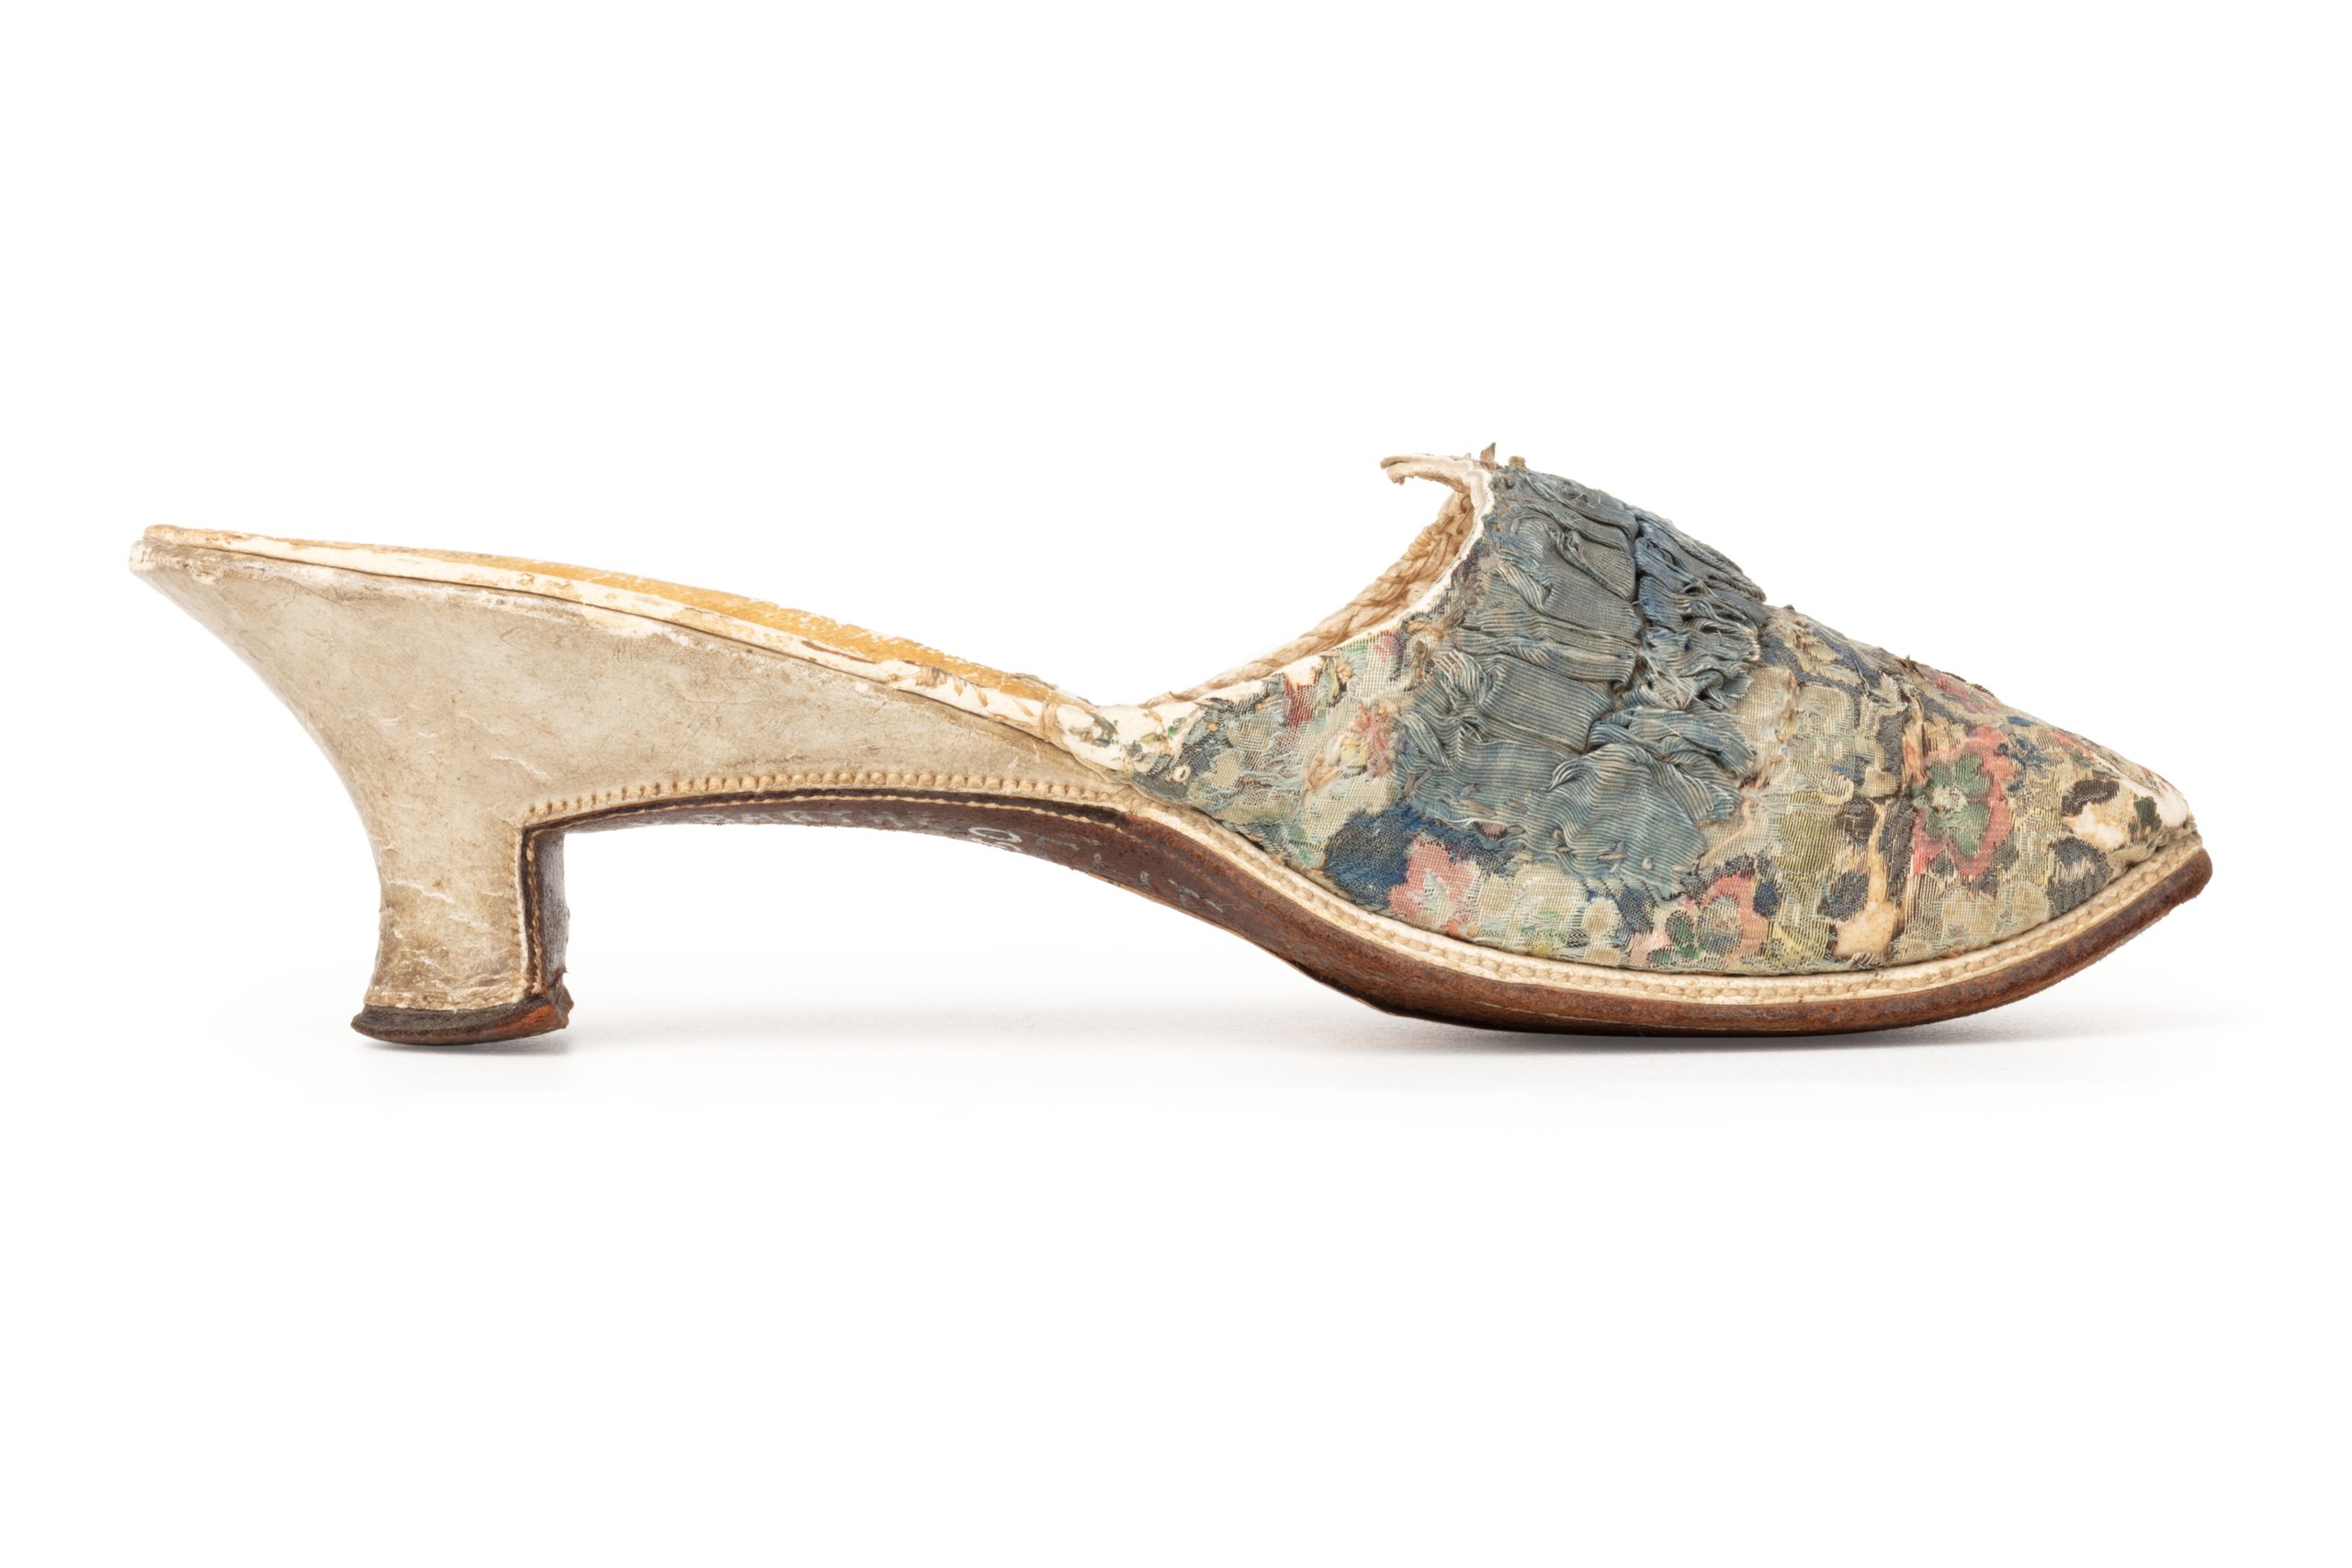 Mule shoe from the Joseph Box collection